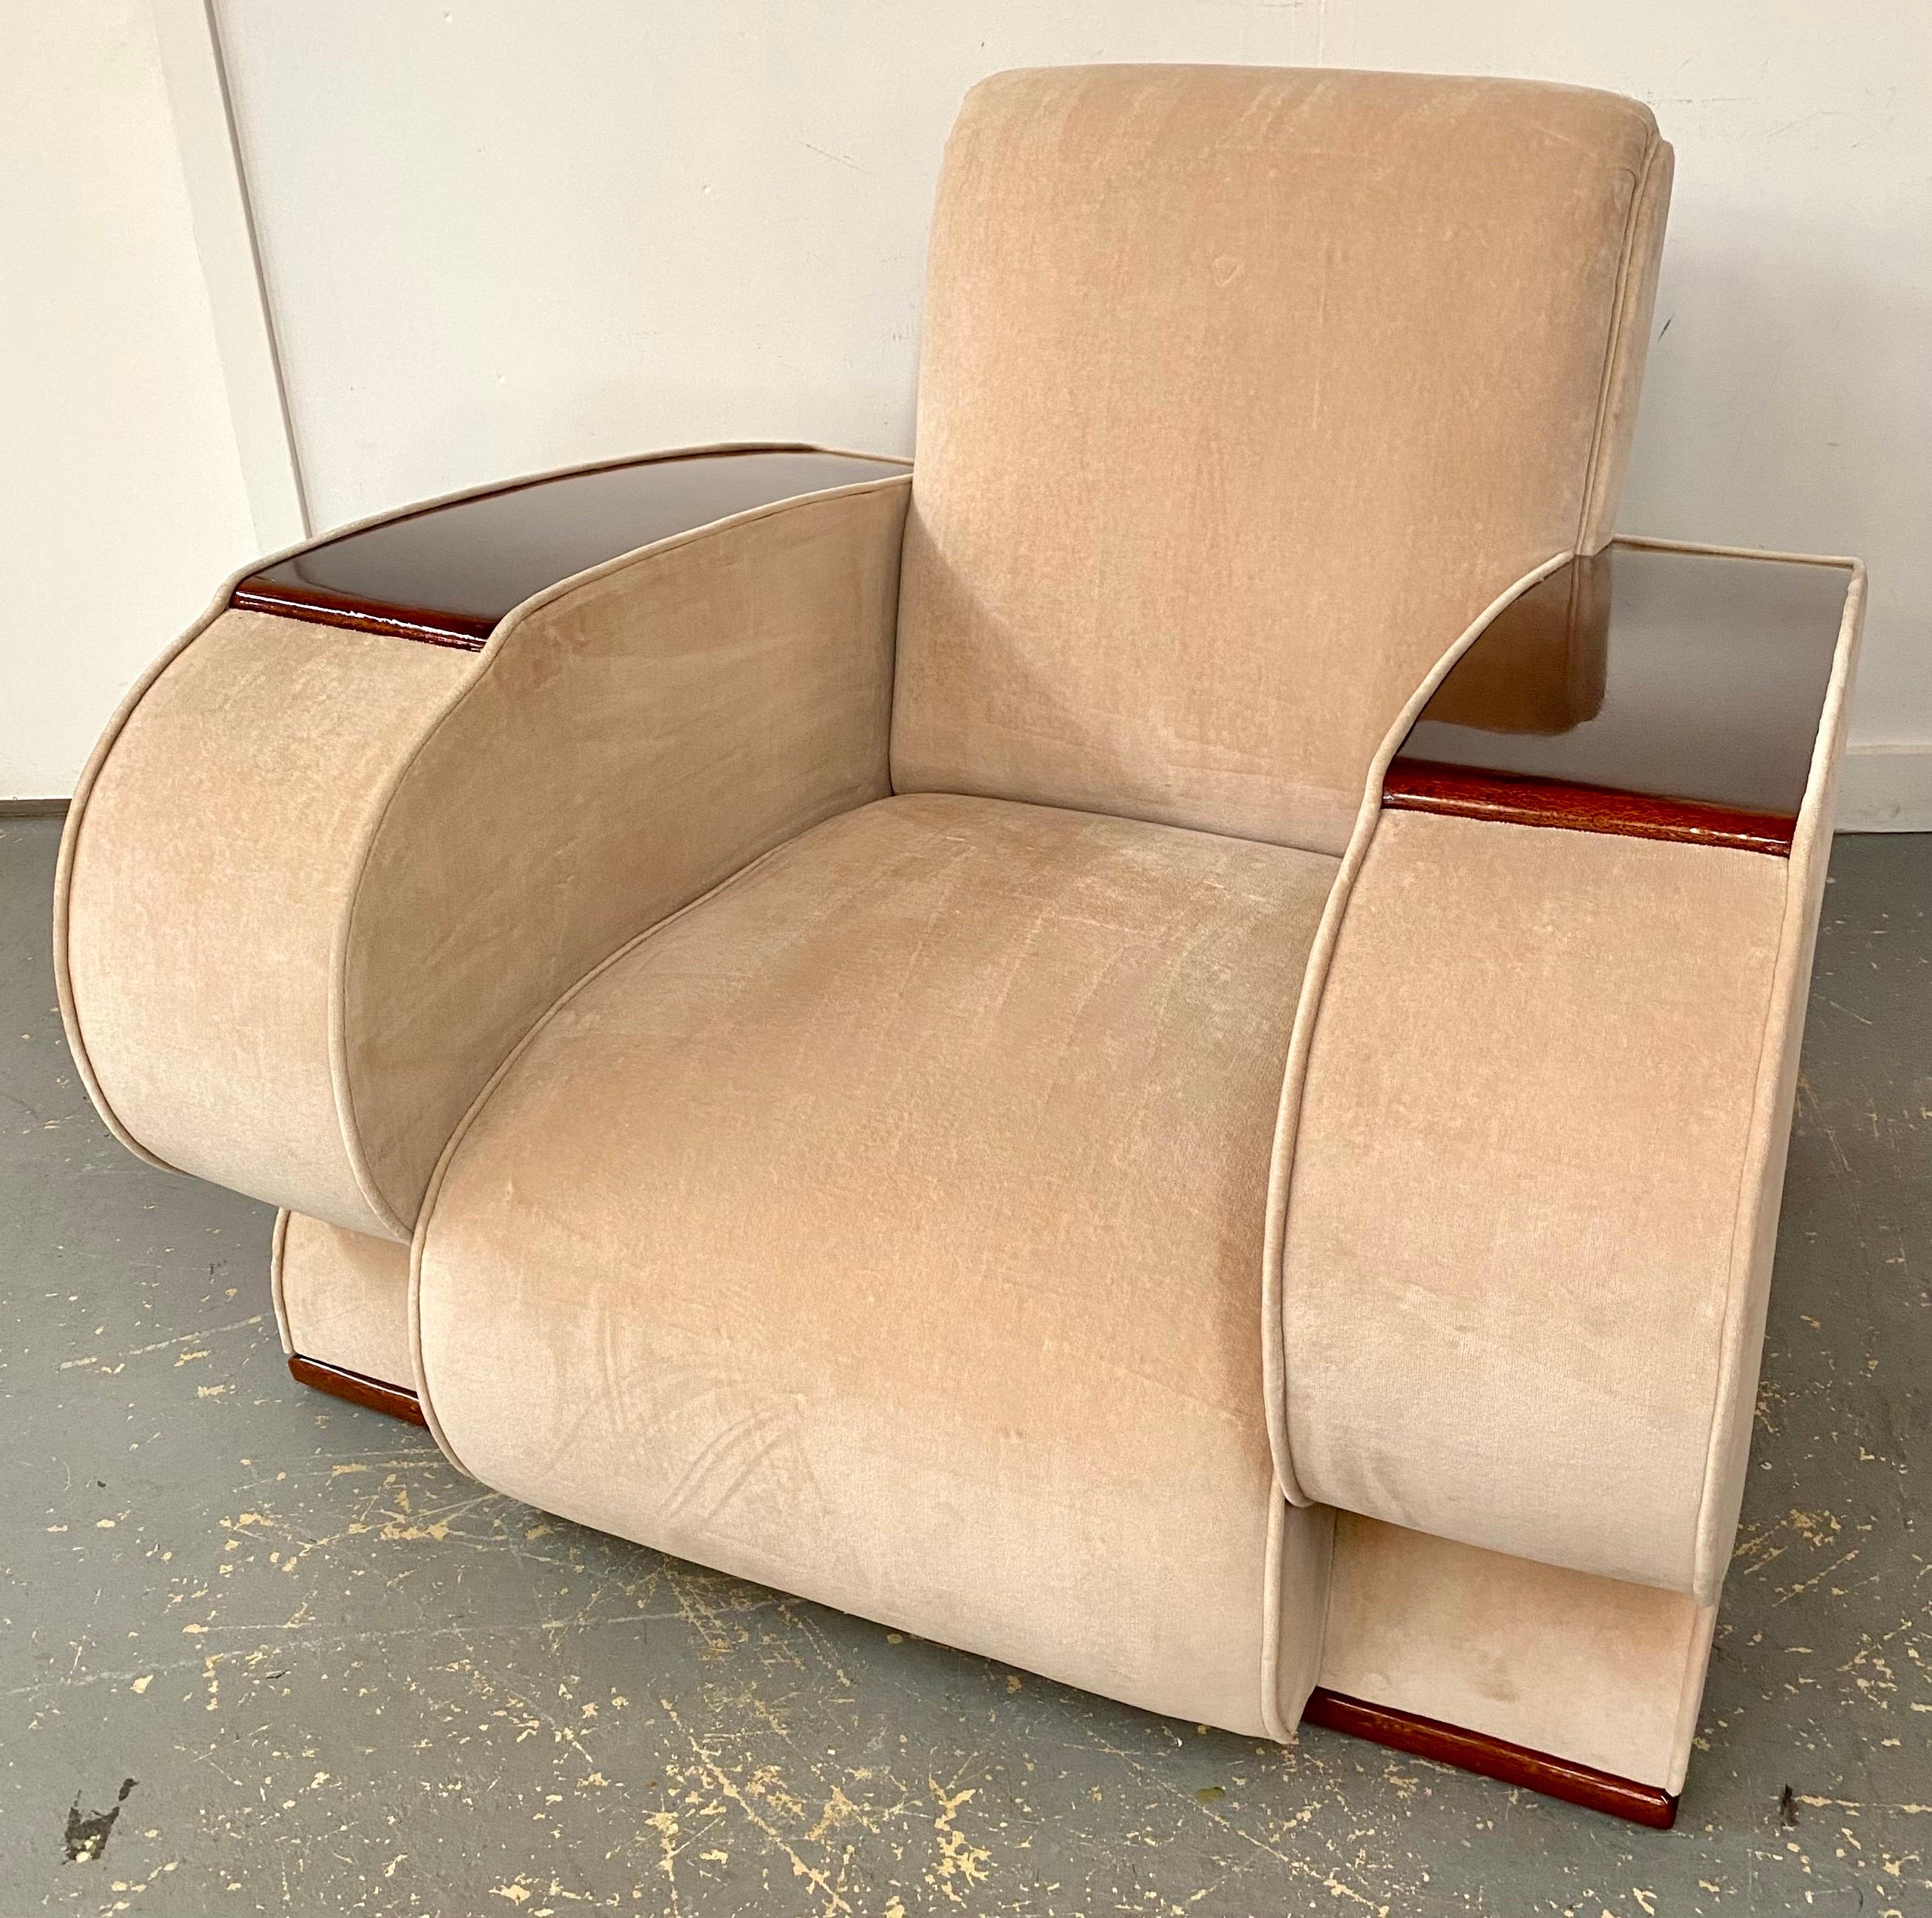 20th Century French Art Deco Club or Lounge Chair in Beige Suede Upholstery, a Pair  For Sale